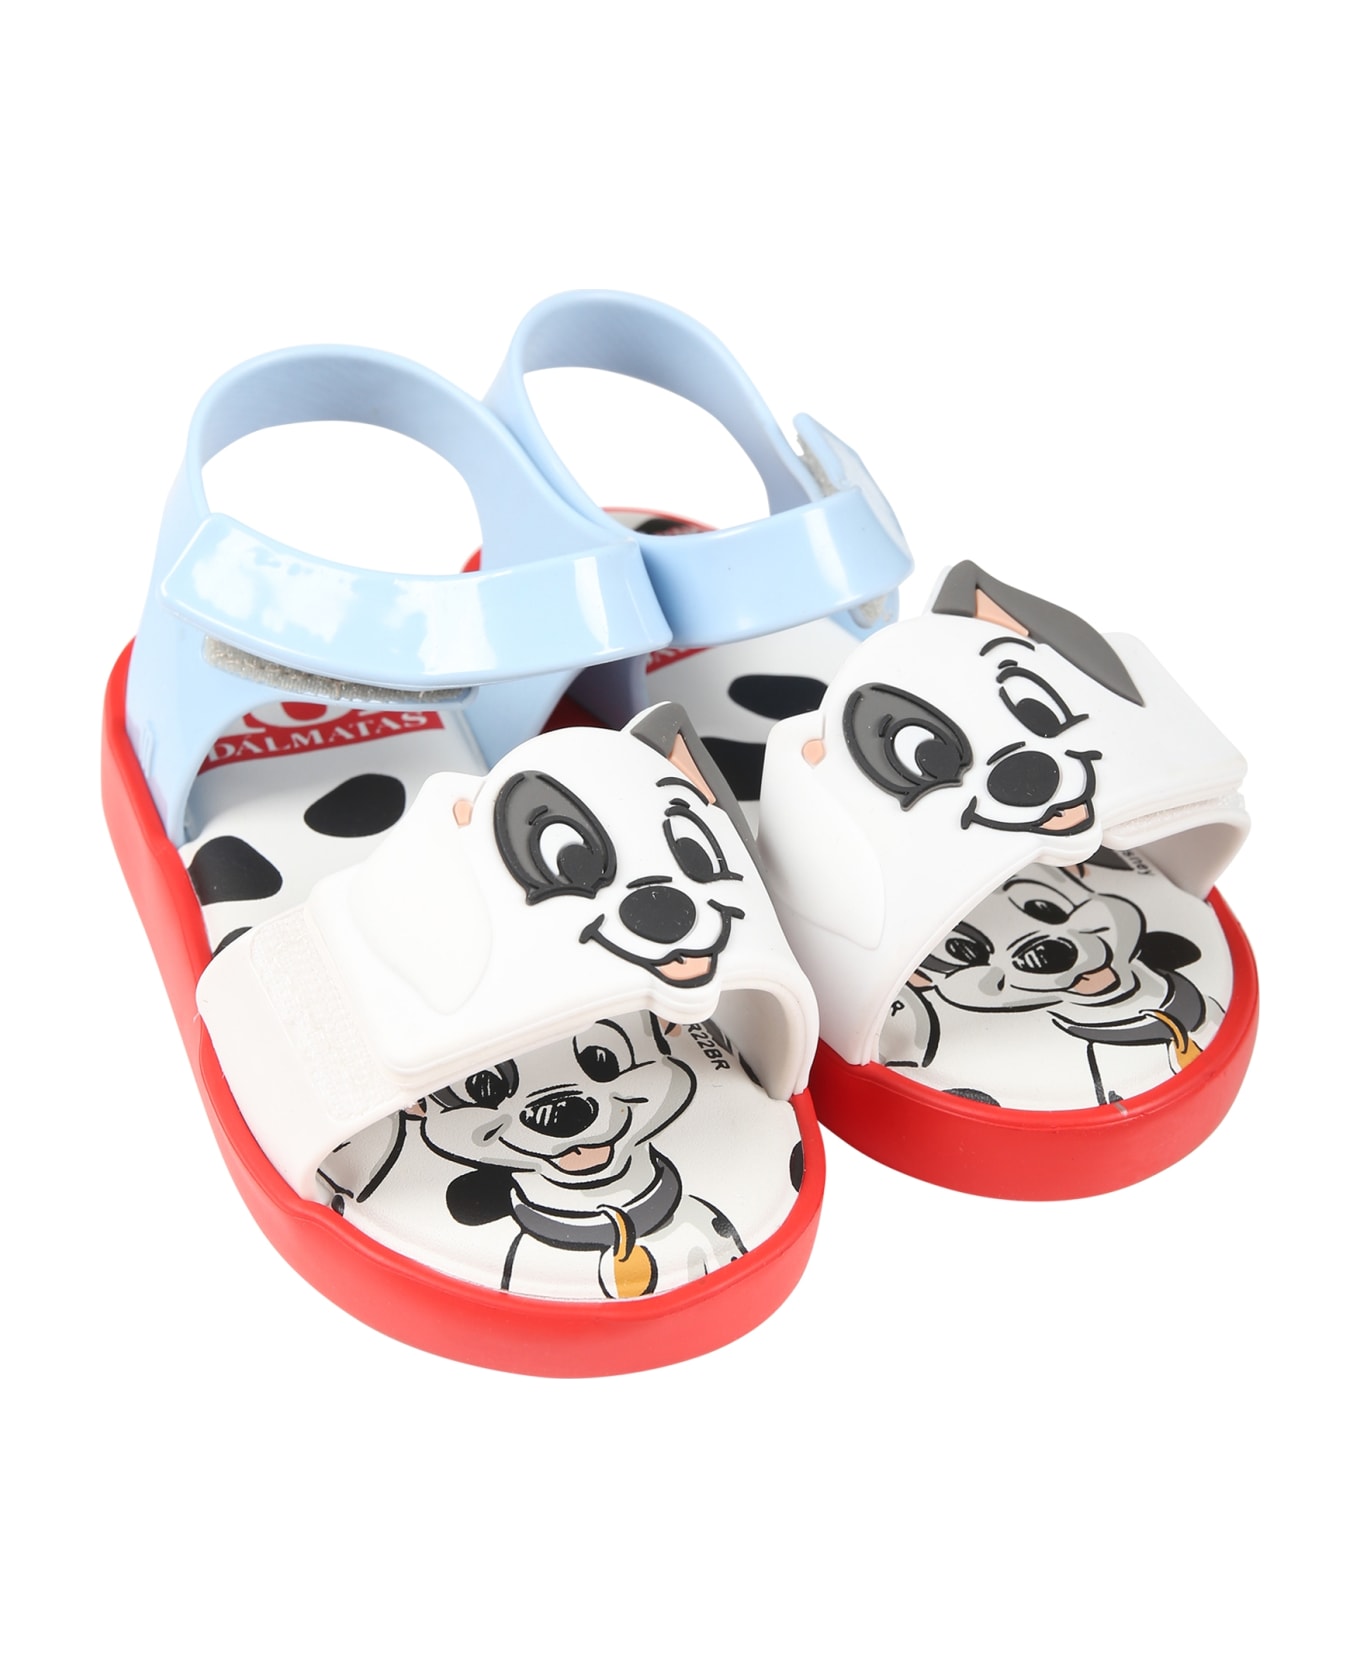 Melissa Red Sandals For Kids With 101 Dalmatians - Red シューズ